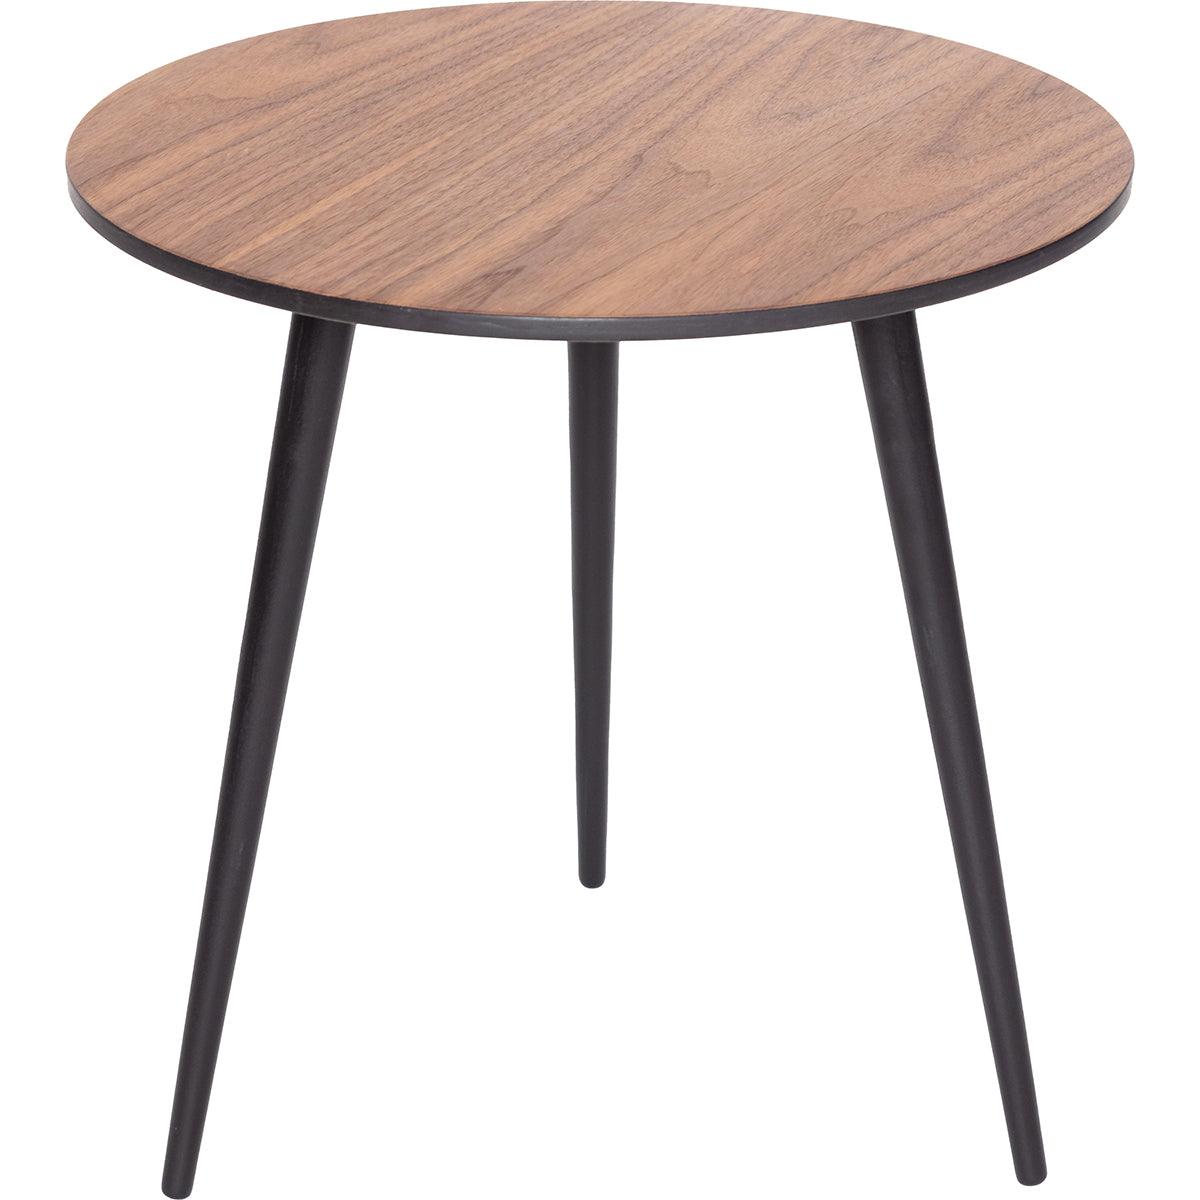 Pawi Round Coffee Table - WOO .Design